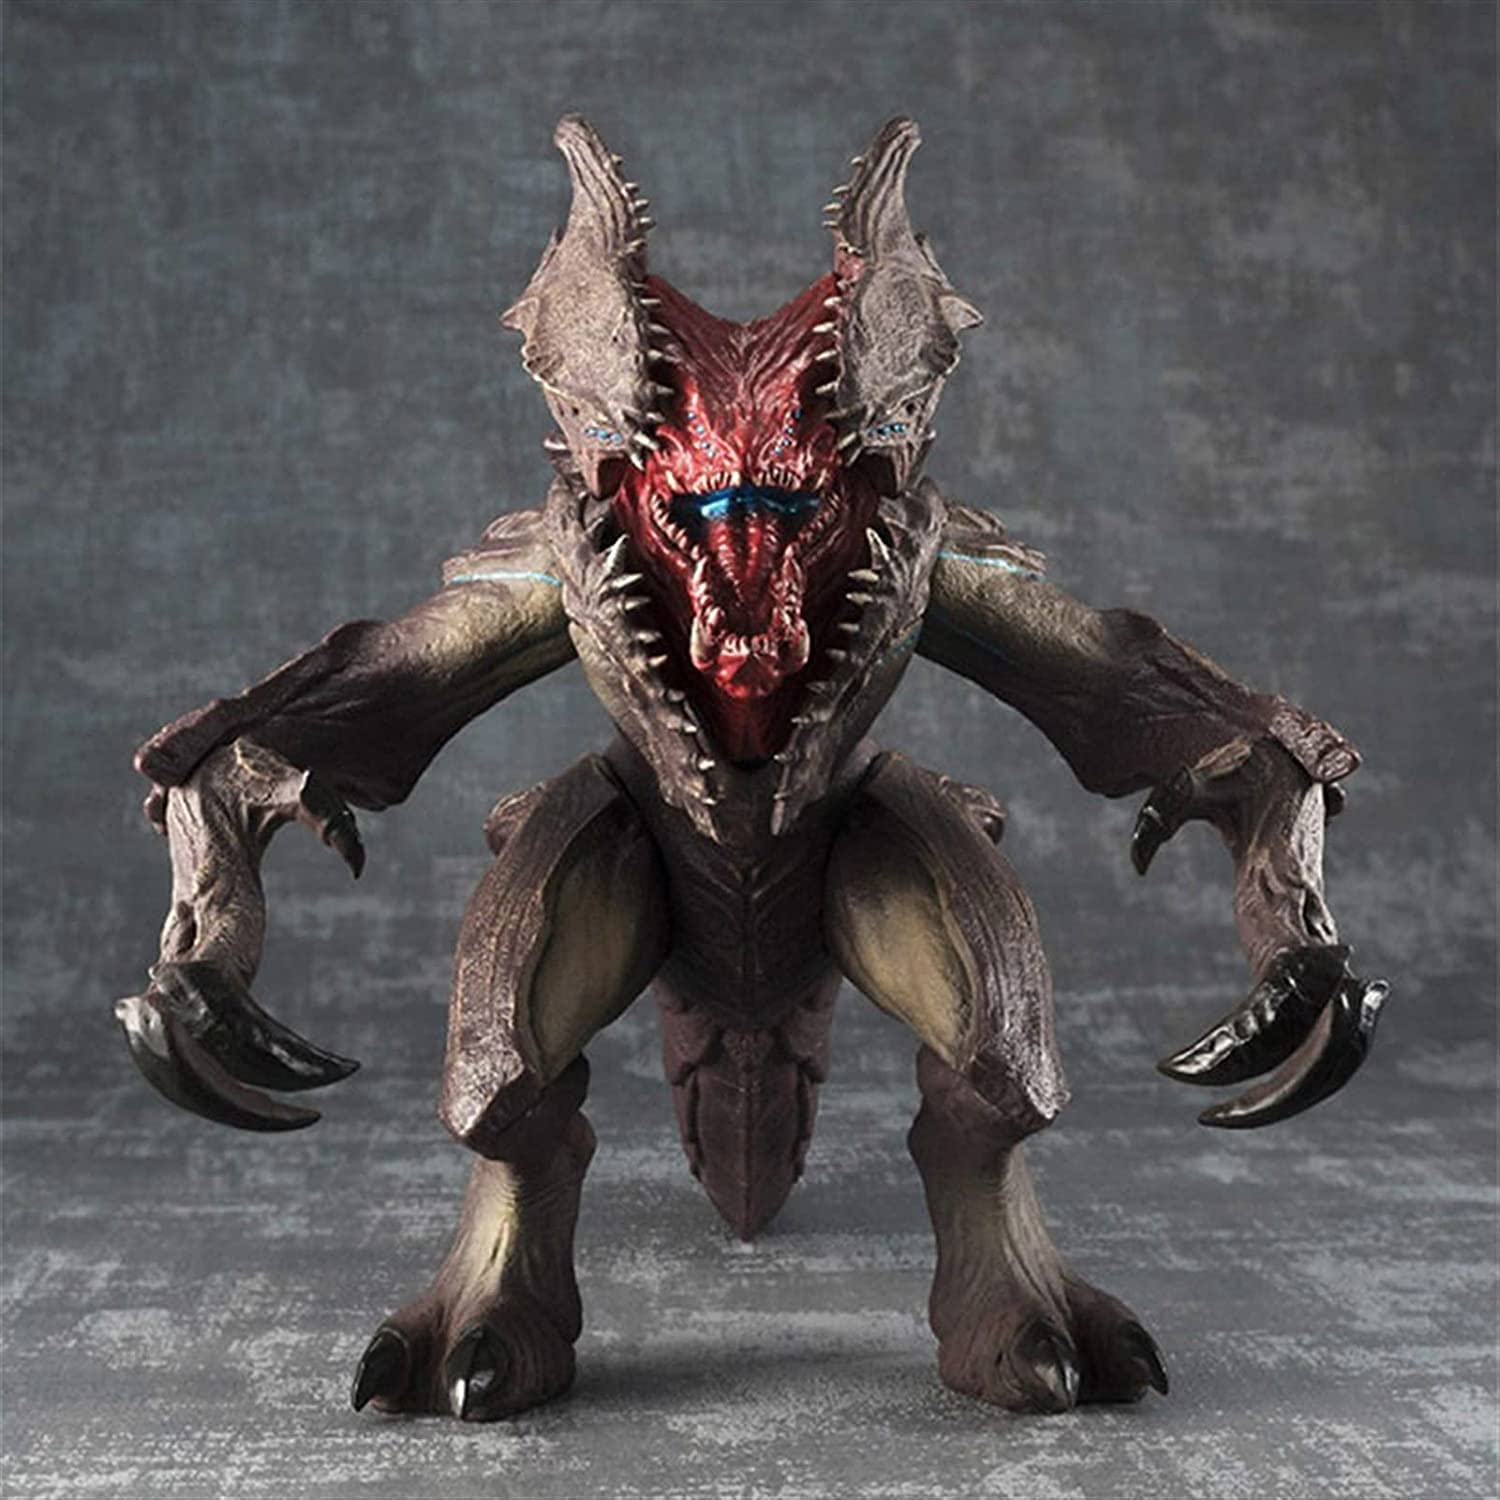 Mua ZKYOP Pacific Rim 2: Knifehead Kaiju Monster Action Figure Figurines  Toys PVC Movie Figuart Kid Toy Dolls Birthday Gifts Best Gift for Kids  Adults and Anime Fans trên Amazon Mỹ chính